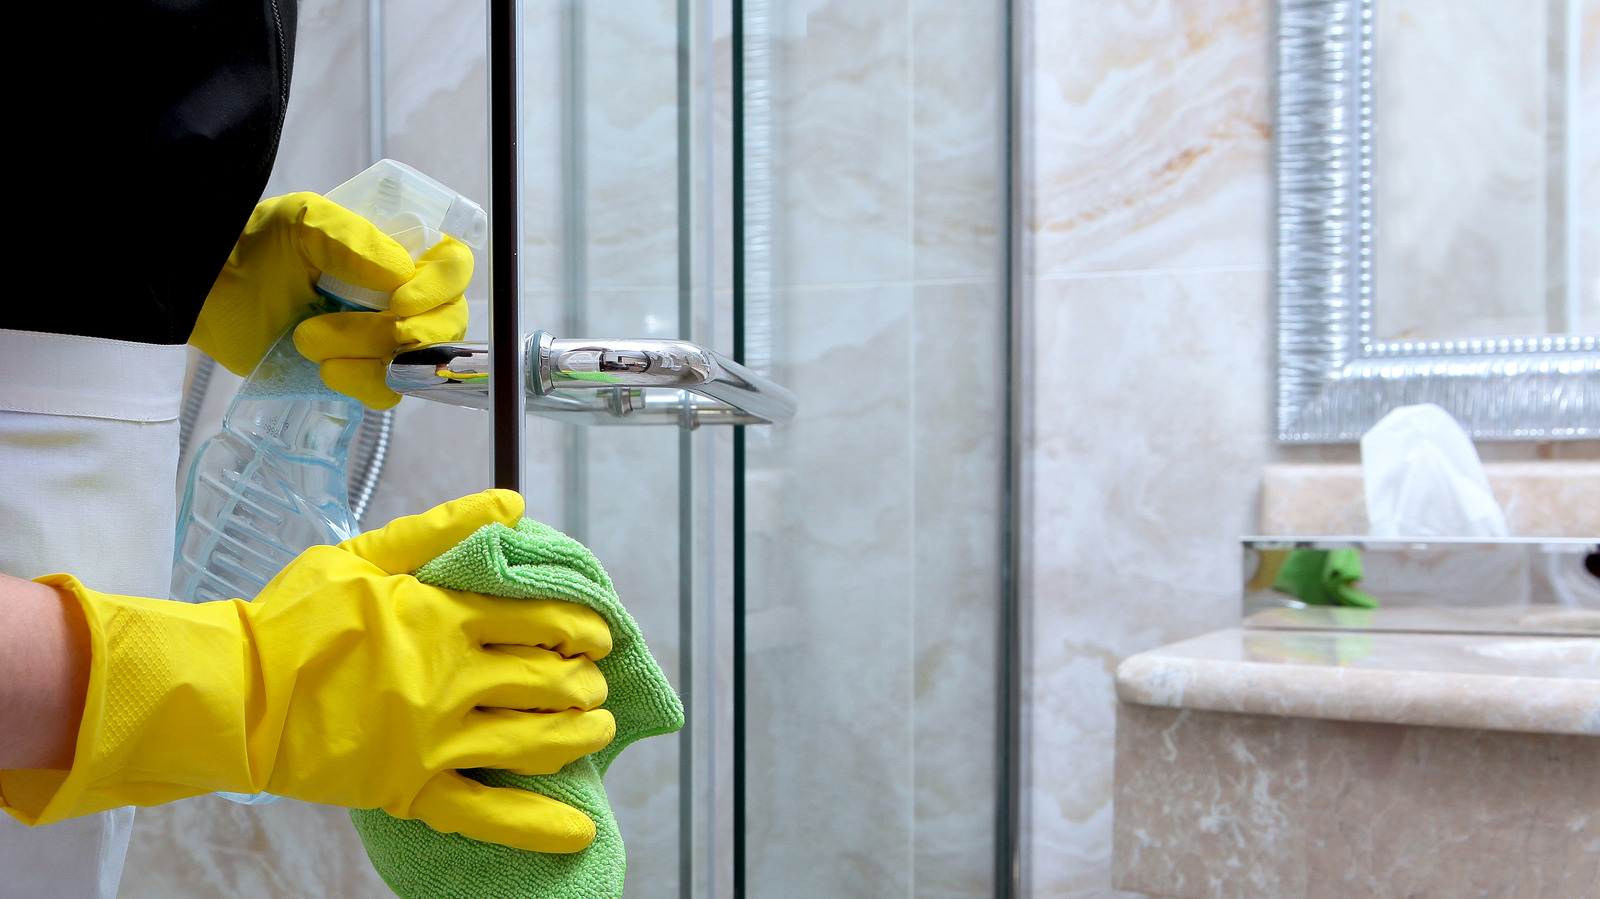 https://www.housedigest.com/img/gallery/this-housekeeper-approved-hack-will-keep-your-shower-spotless/l-intro-1634560033.jpg